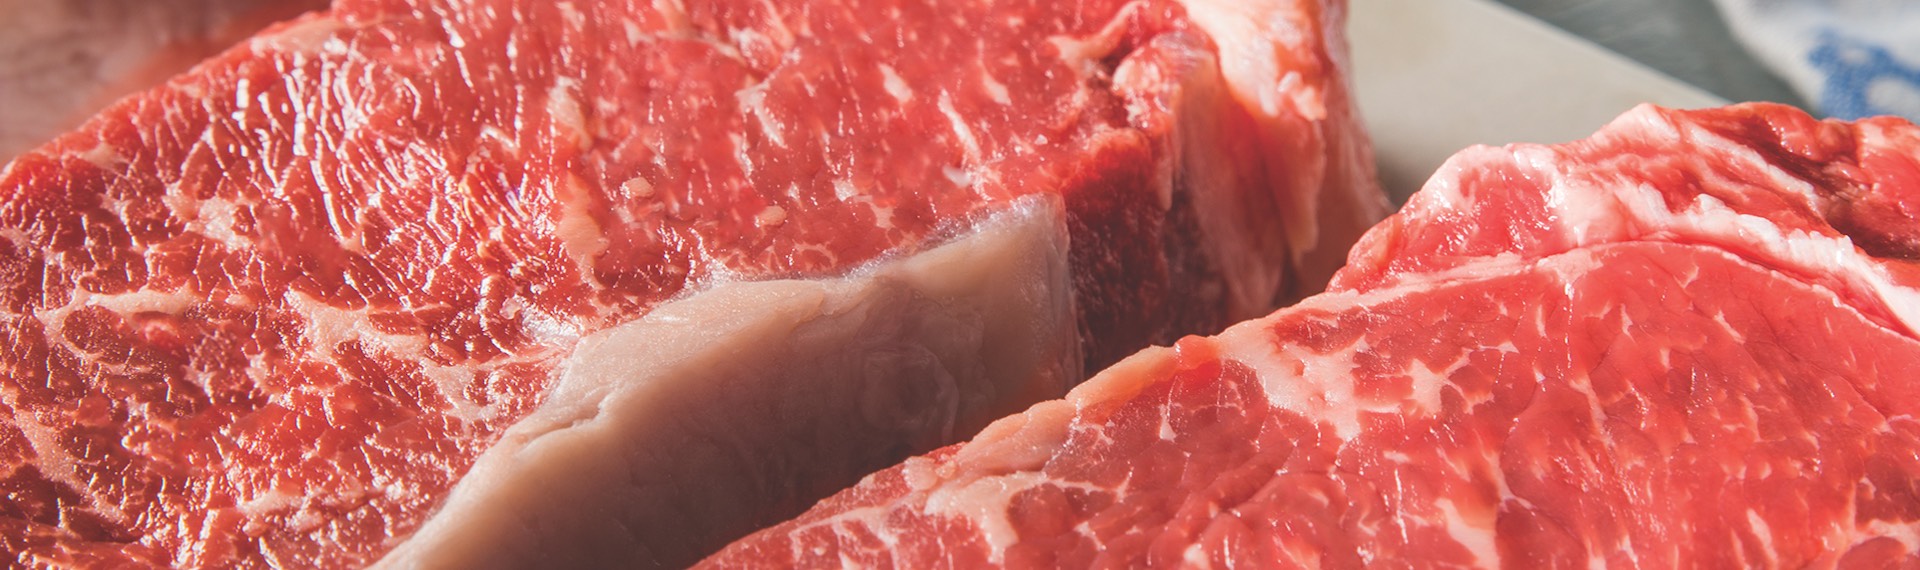 Certified Angus Beef: What Makes It Great